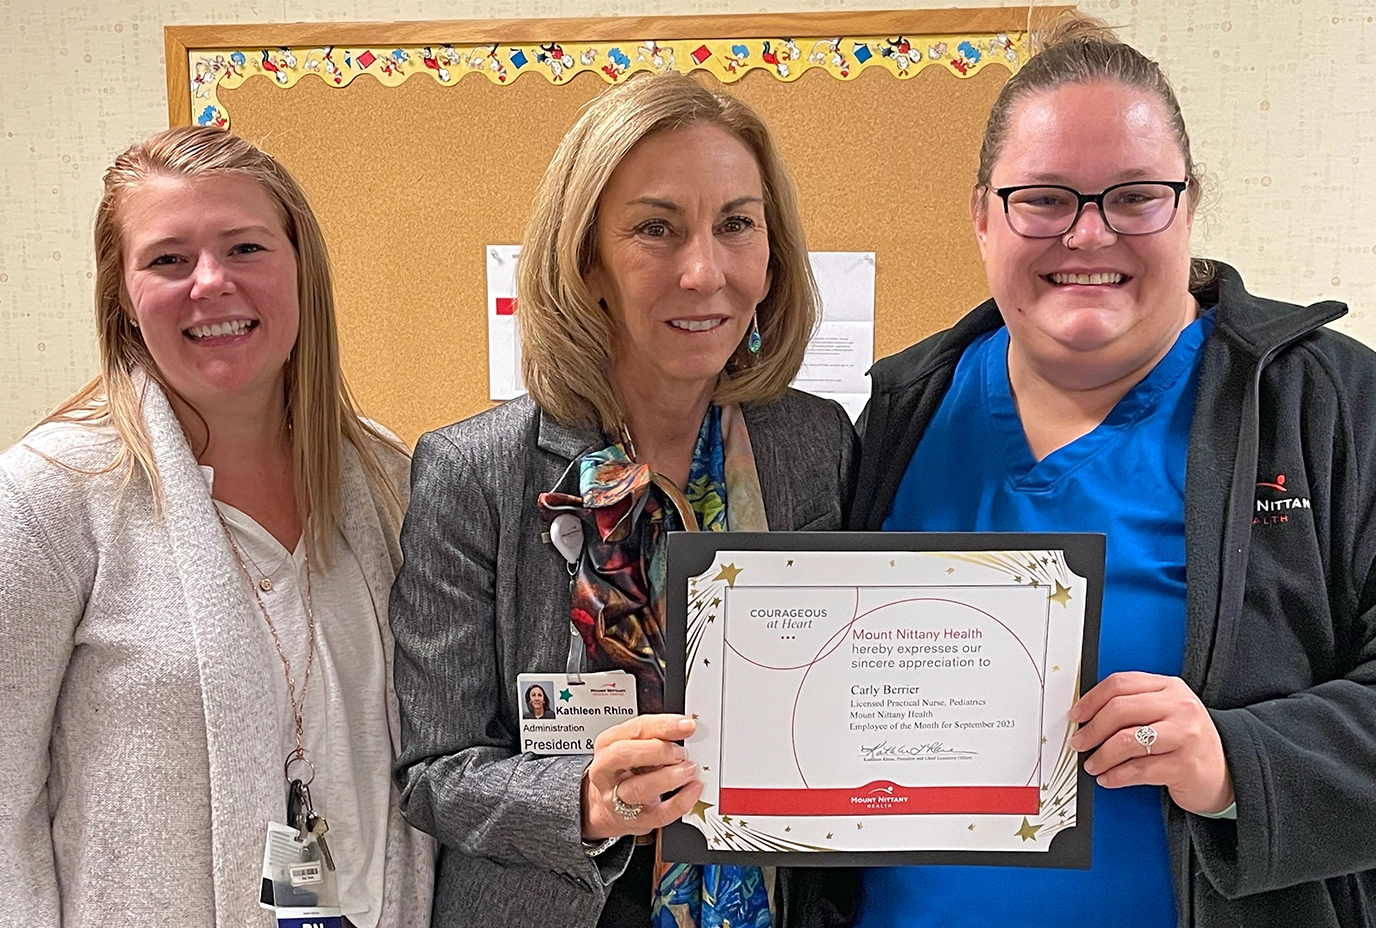 Mount Nittany Health Celebrates Carly Berrier, LPN, as the September 2023 Employee of the Month